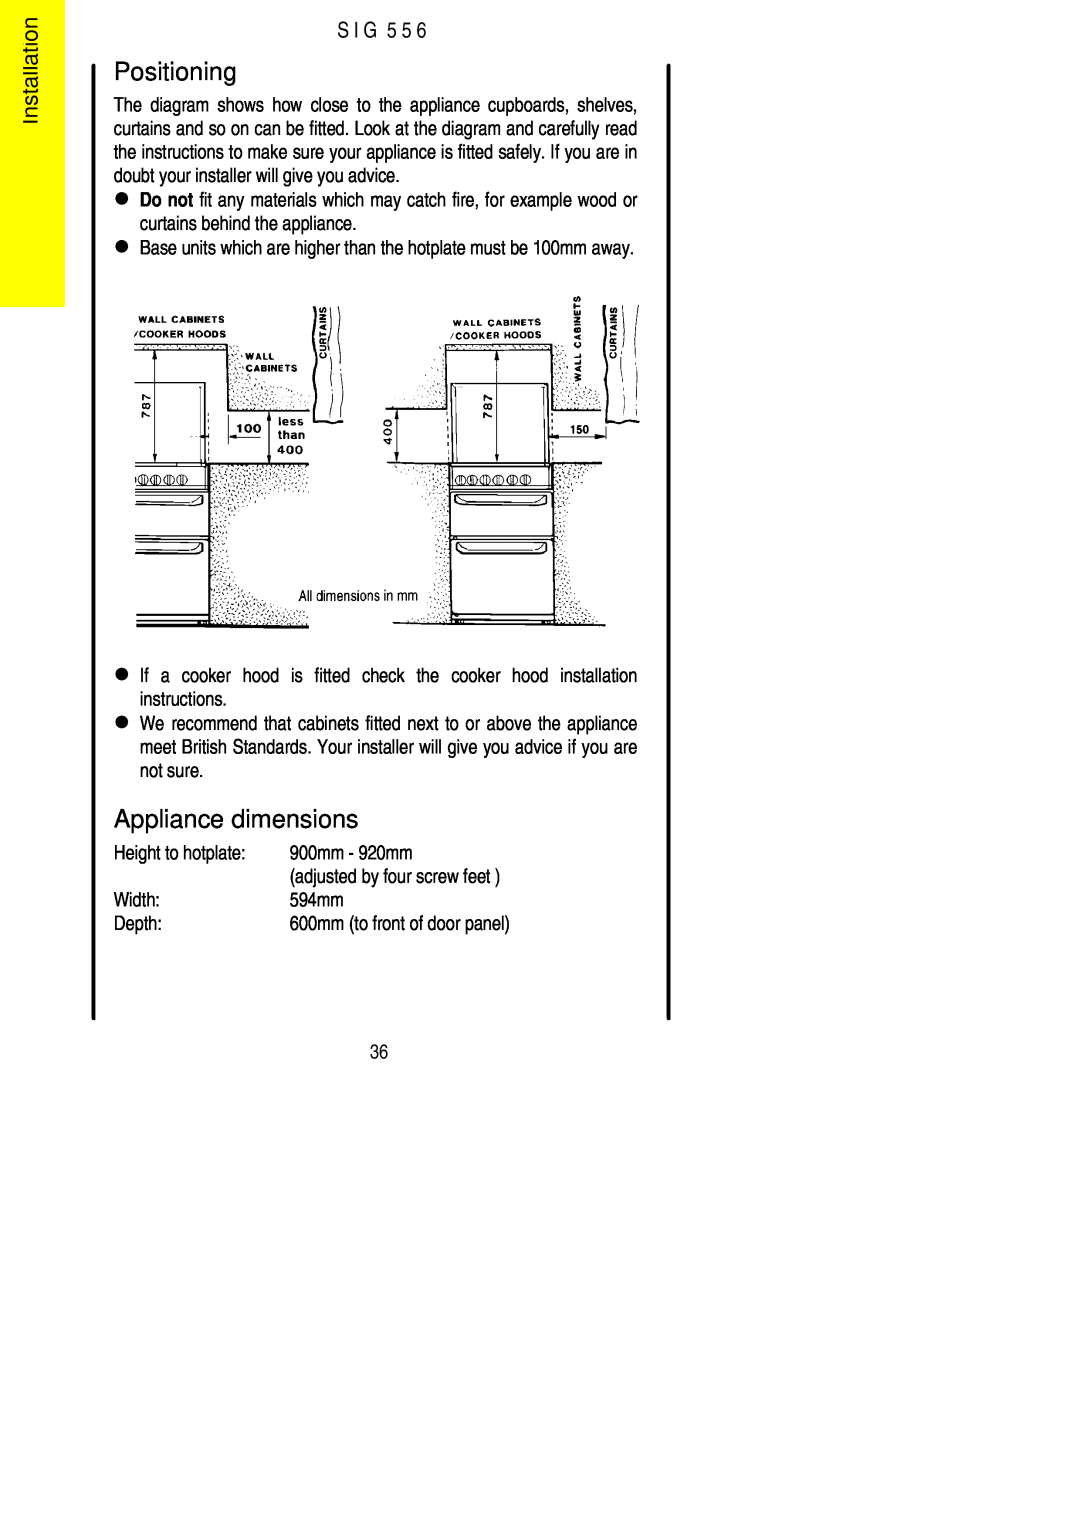 Electrolux SIG 556 installation instructions Positioning, Appliance dimensions, Installation, S I G 5 5 